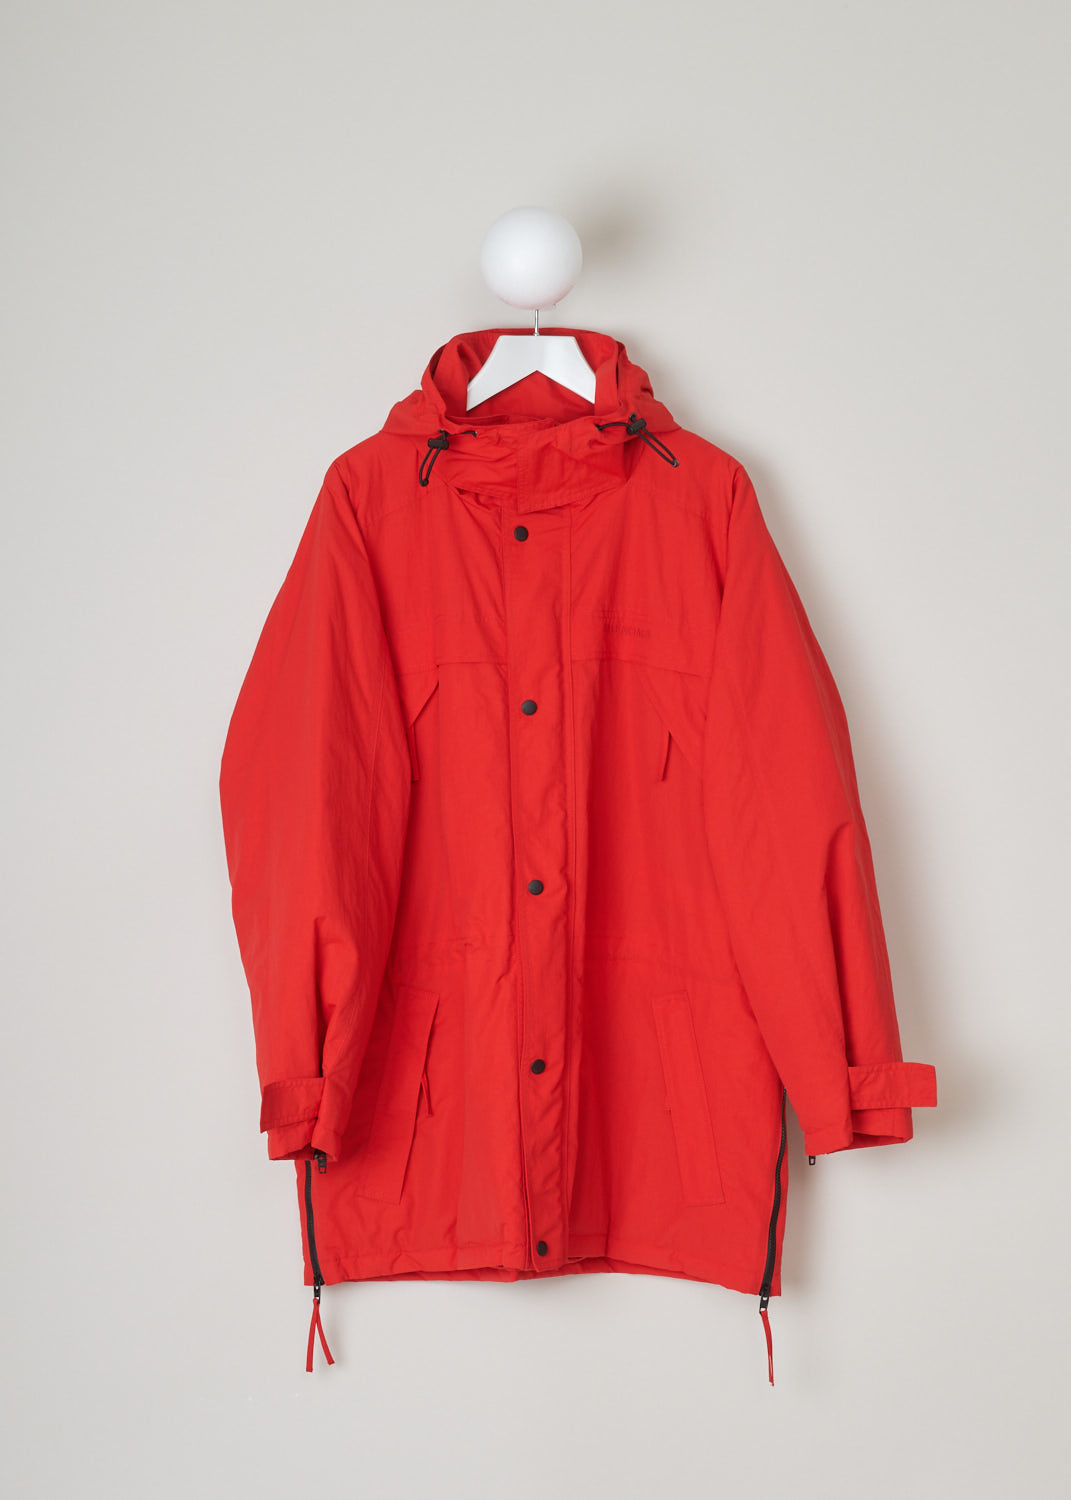 Balenciaga, Red parka model, 646774_TJ014_6400, red, front. Red oversized parka has lots of features beginning with the hood which is lined and detachable with press buttons. Going down this model has 4 pockets 2 on chest height 2 below that, with al the pockets being forward slanted. There is a cord tunnel on the inside with which the width of the waist can be adjusted. The fun part of this parka is the zipper which starts from the sides going up to the armpit and ending on the sleeves. Comes with zip fastening 